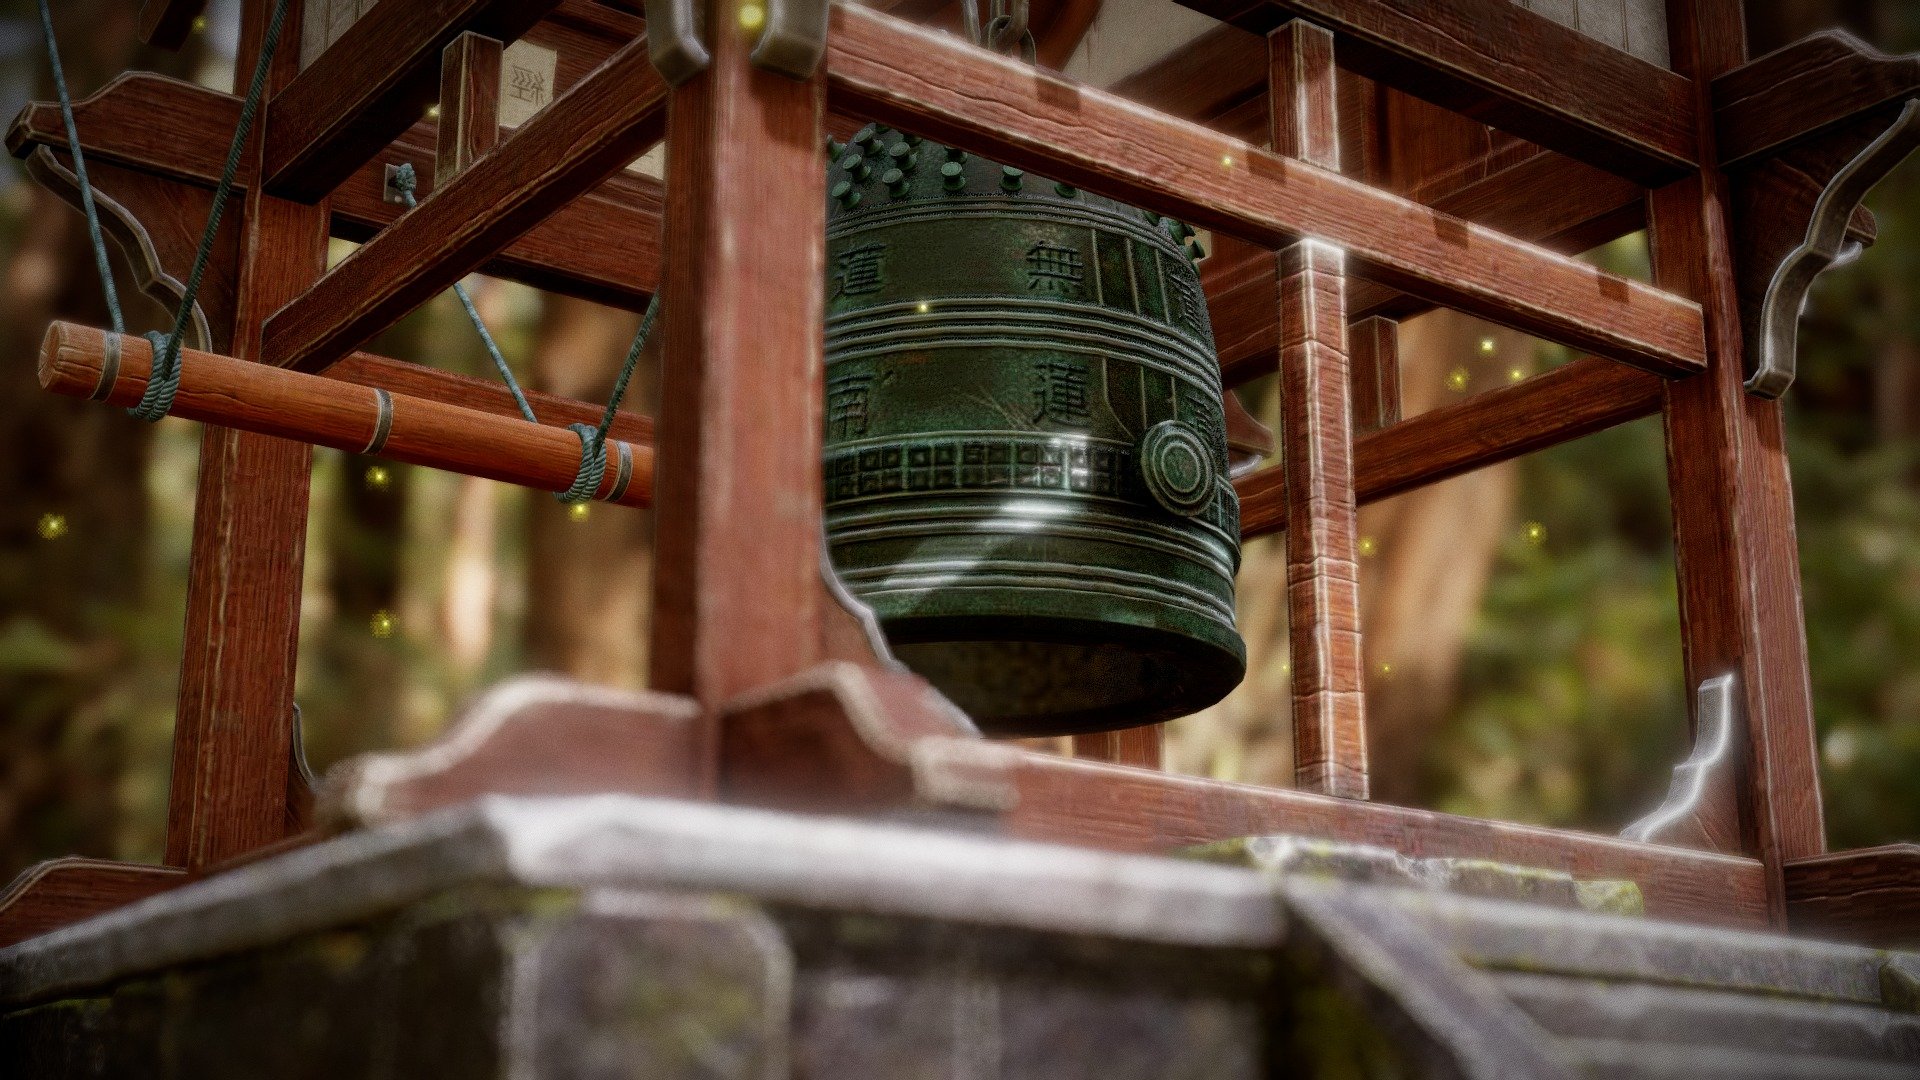 Third prop for the Feudal Japan challenge. It's the bell tower of Buddhist temples - the Shōrō. It holds the bell, or the bonshō. This is the latest form of the tower, called the fukihanachi, developed in the 13th century. All the structural parts are visible and the bell is in the center. 
Made with Blender, baked in Marmoset and textured in Substance. 50k tris with 1 texture set (4k) 3d model